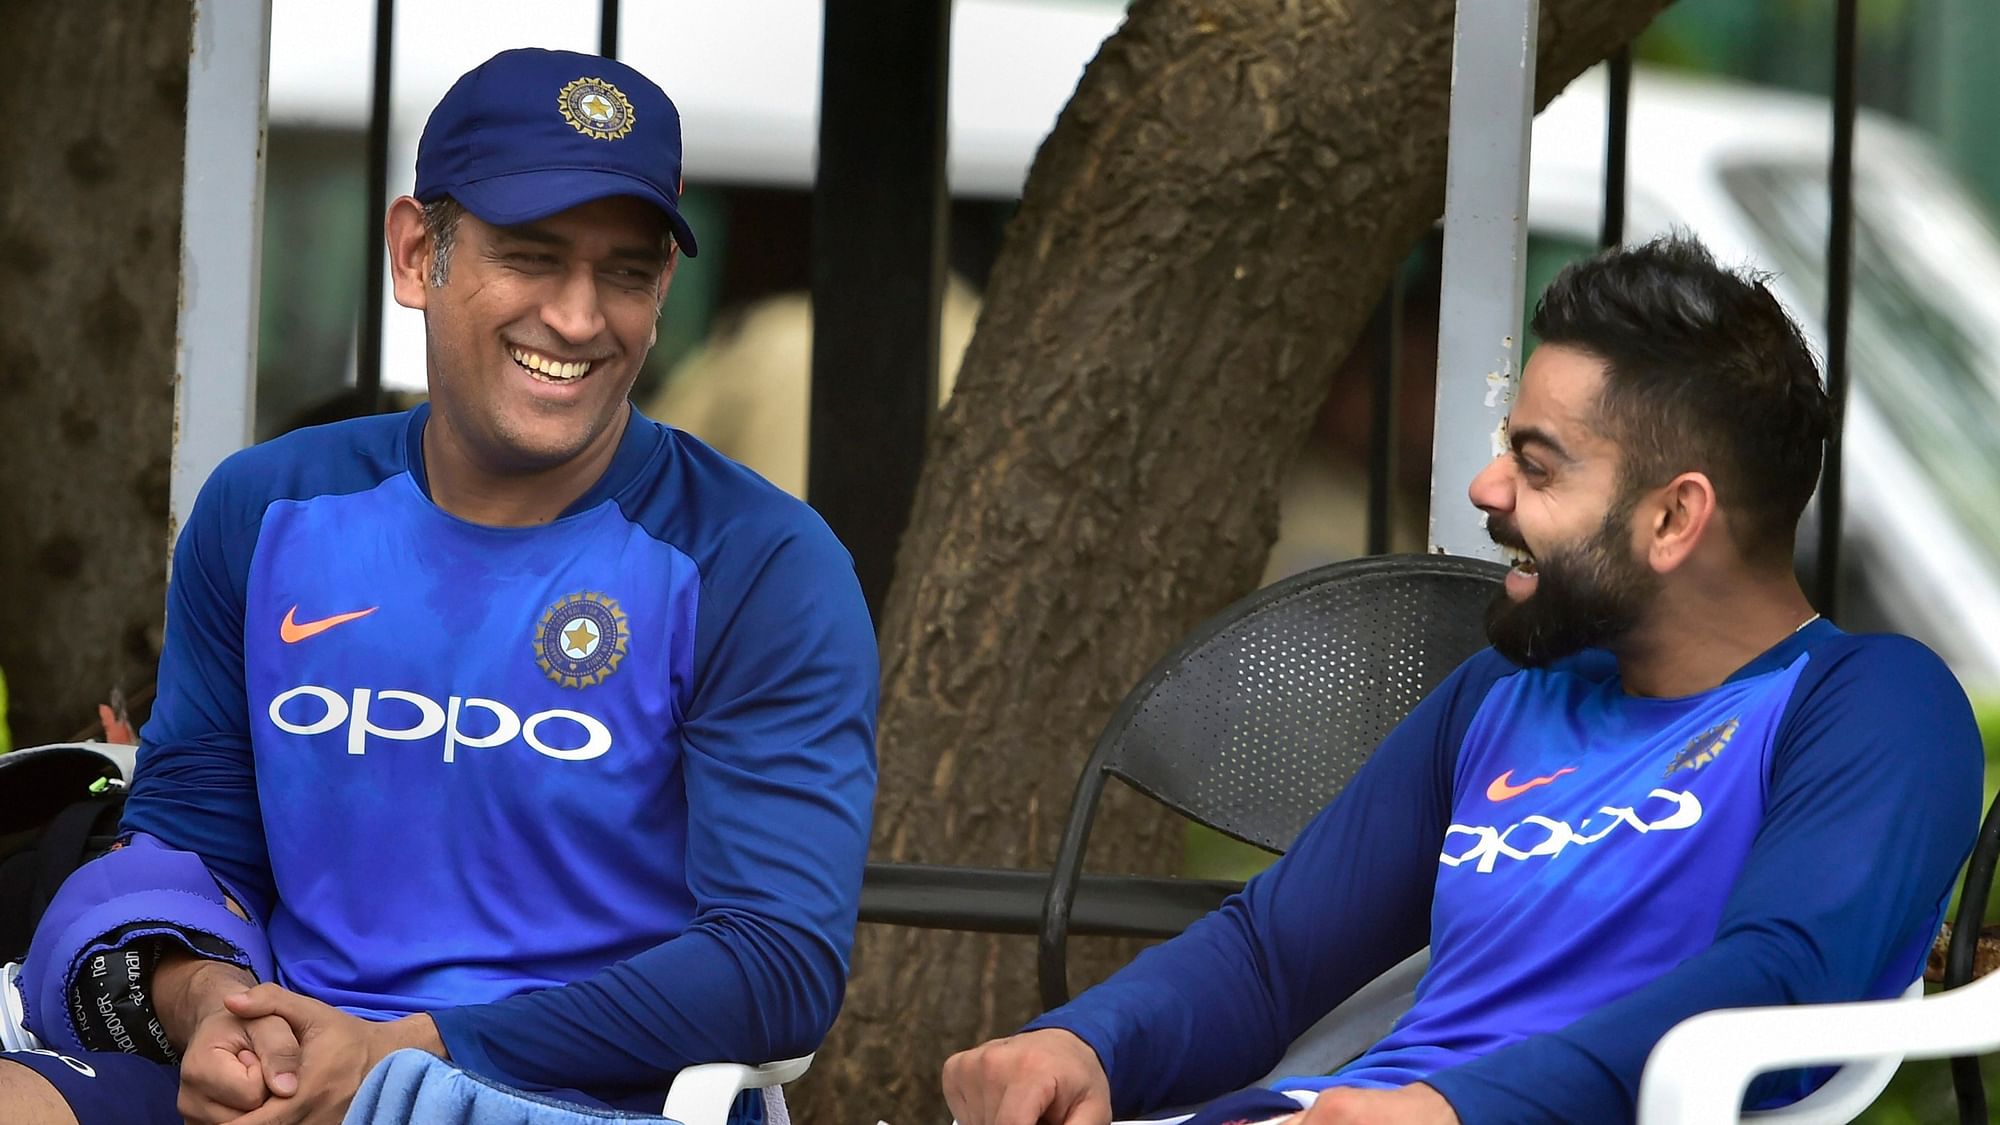 Virat Kohli, Sachin, Ashwin posted emotional farewell messages for MS Dhoni after he announced his international retirement.